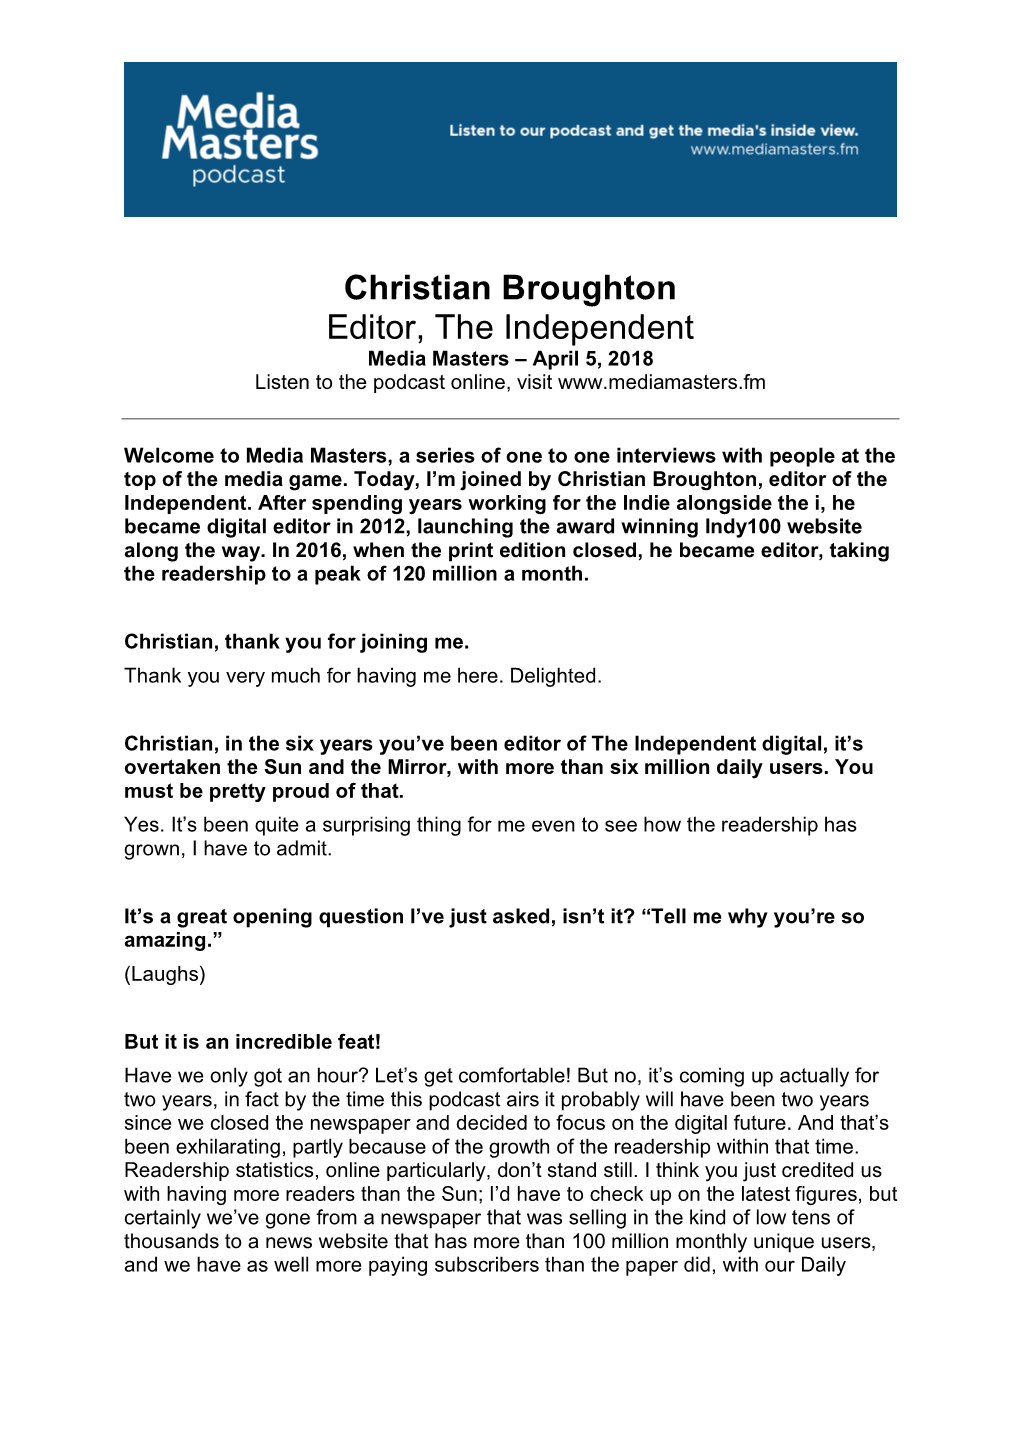 Christian Broughton Editor, the Independent Media Masters – April 5, 2018 Listen to the Podcast Online, Visit